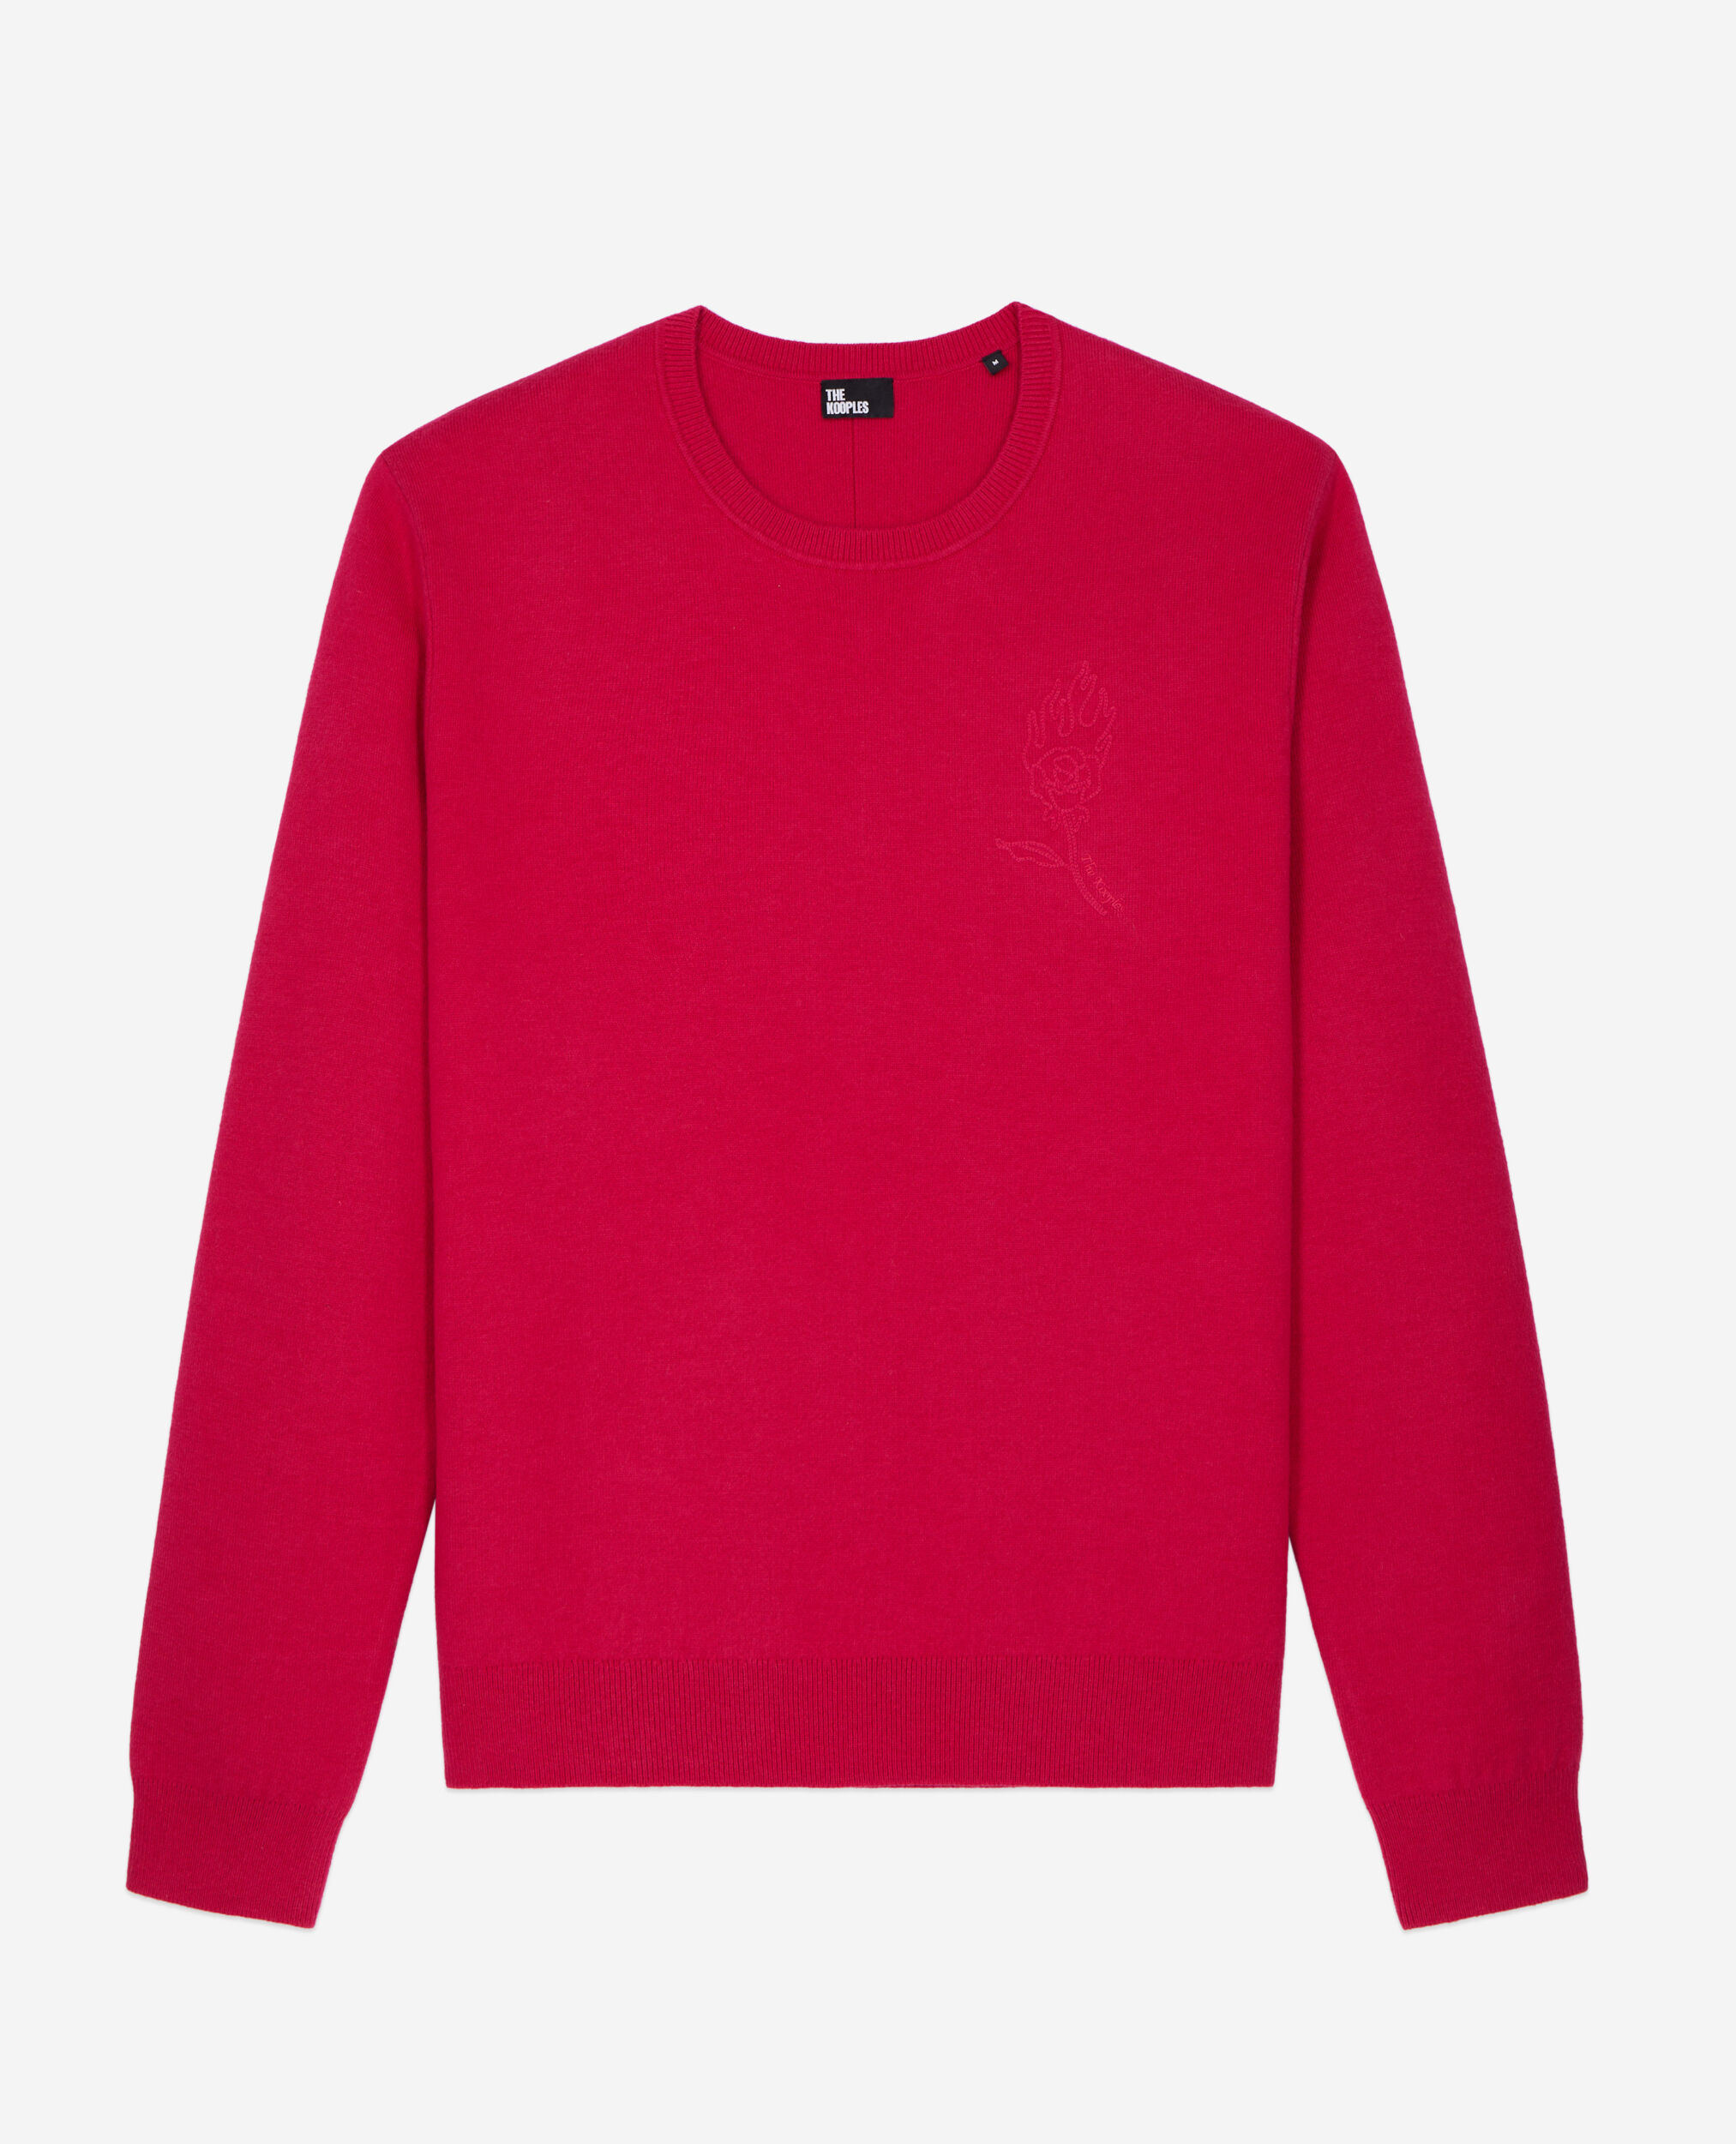 Roter Pullover aus Wolle mit Stickereien, CHERRY, hi-res image number null